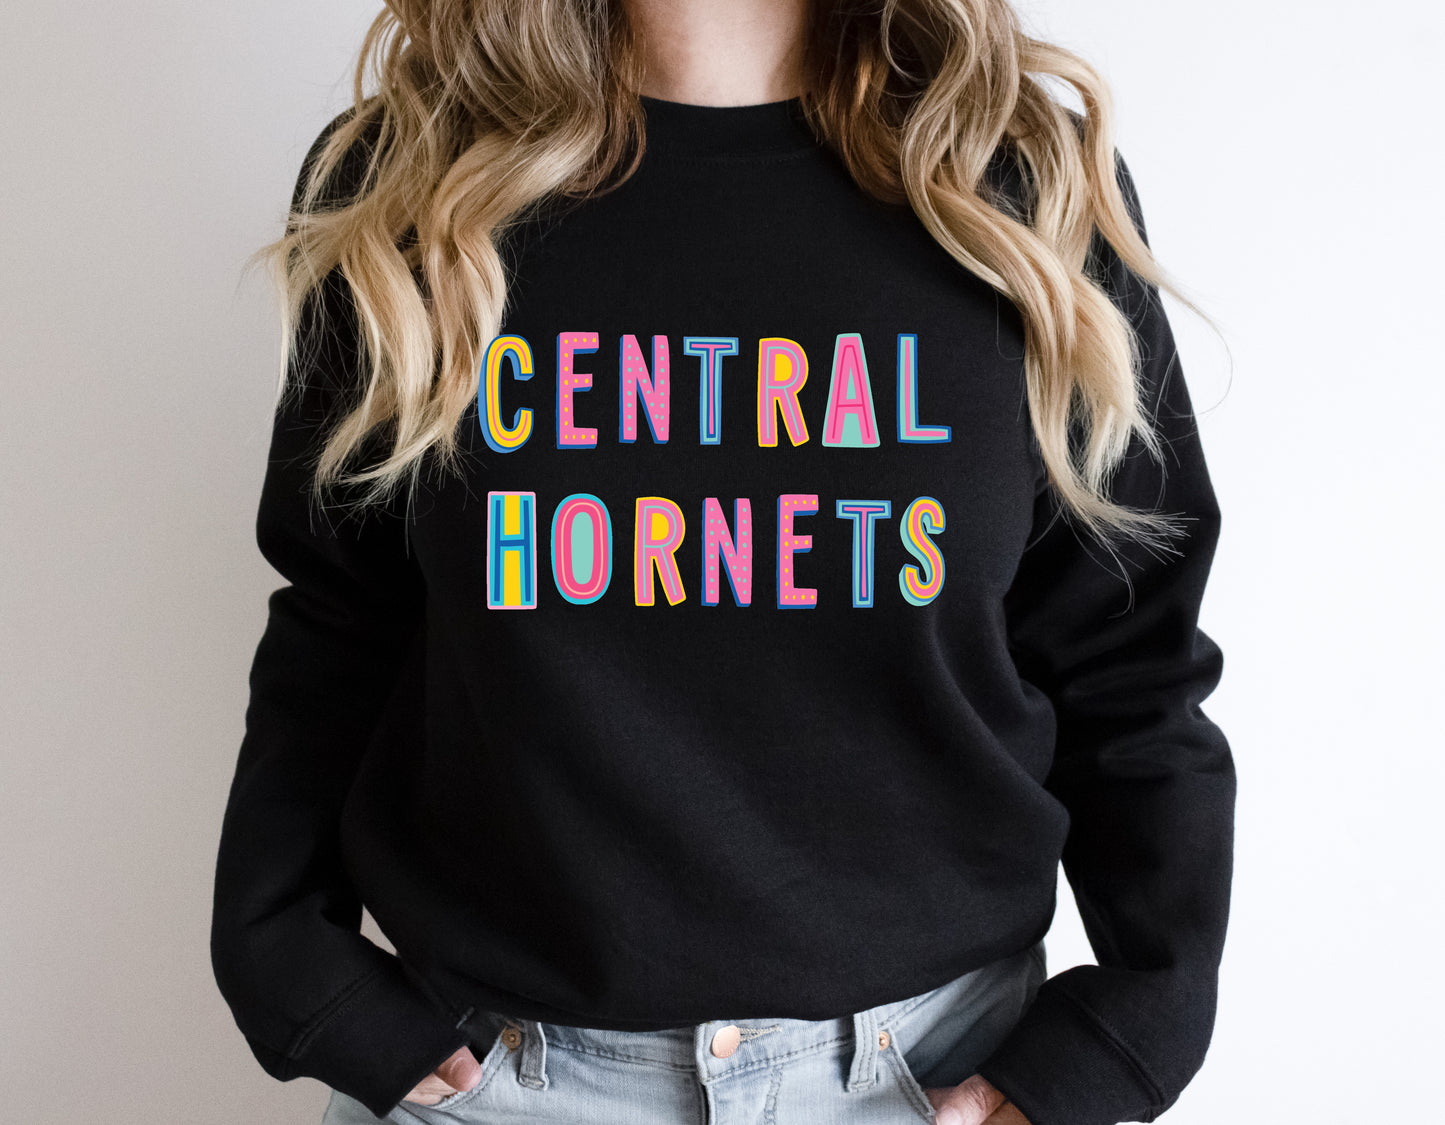 Central Hornets  Colorful Graphic Tee